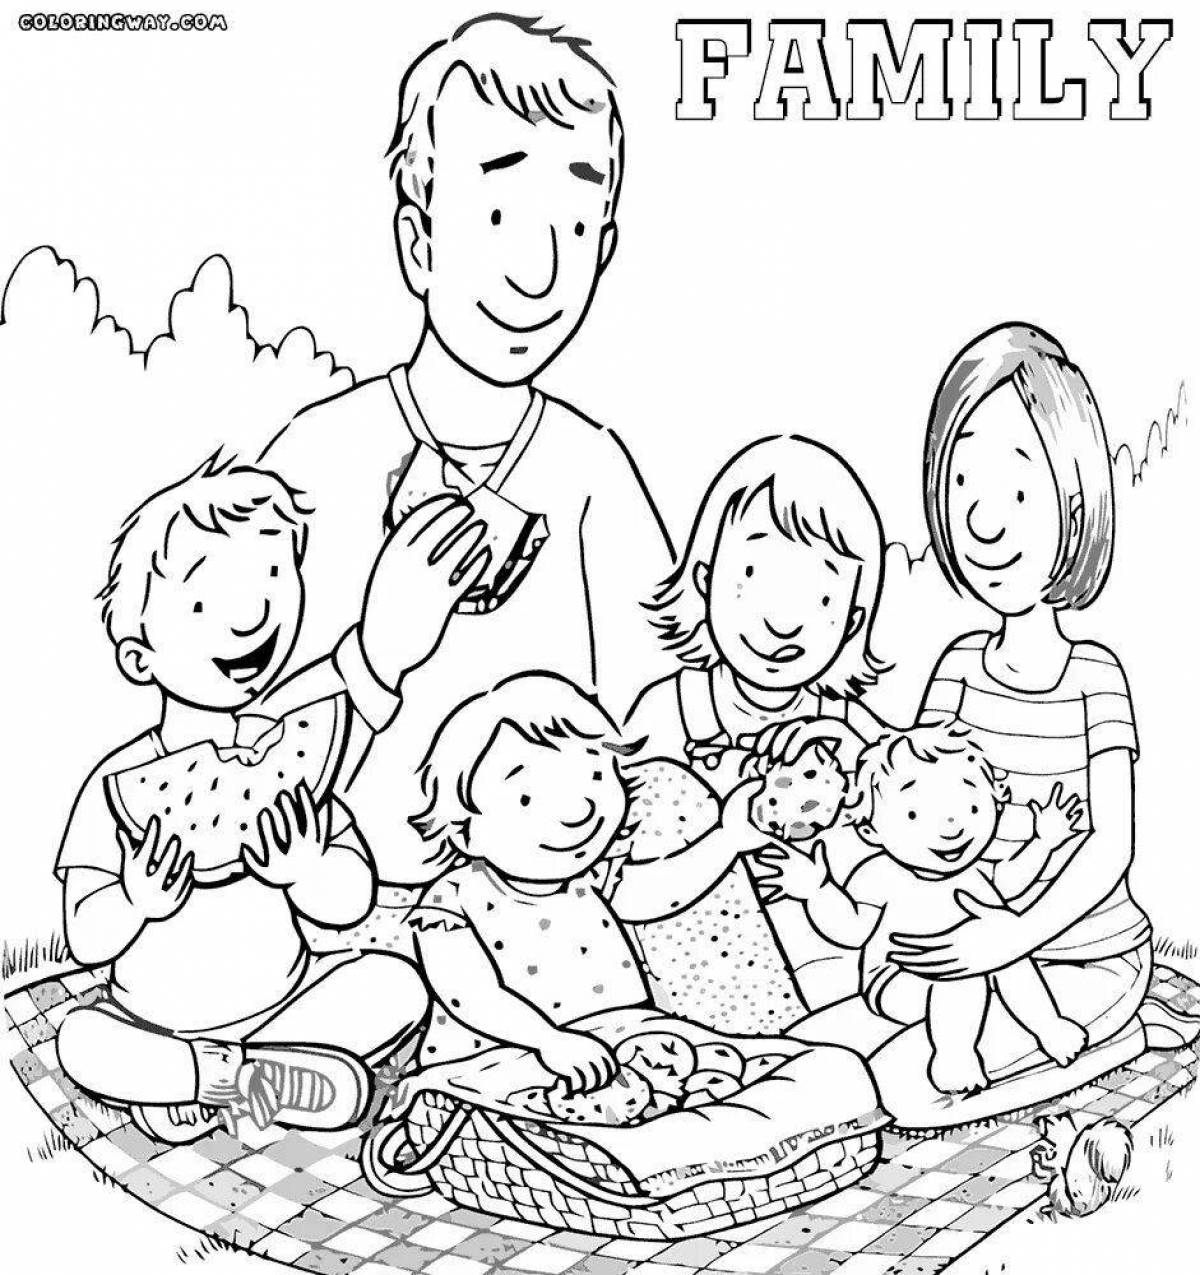 Adorable family coloring picture